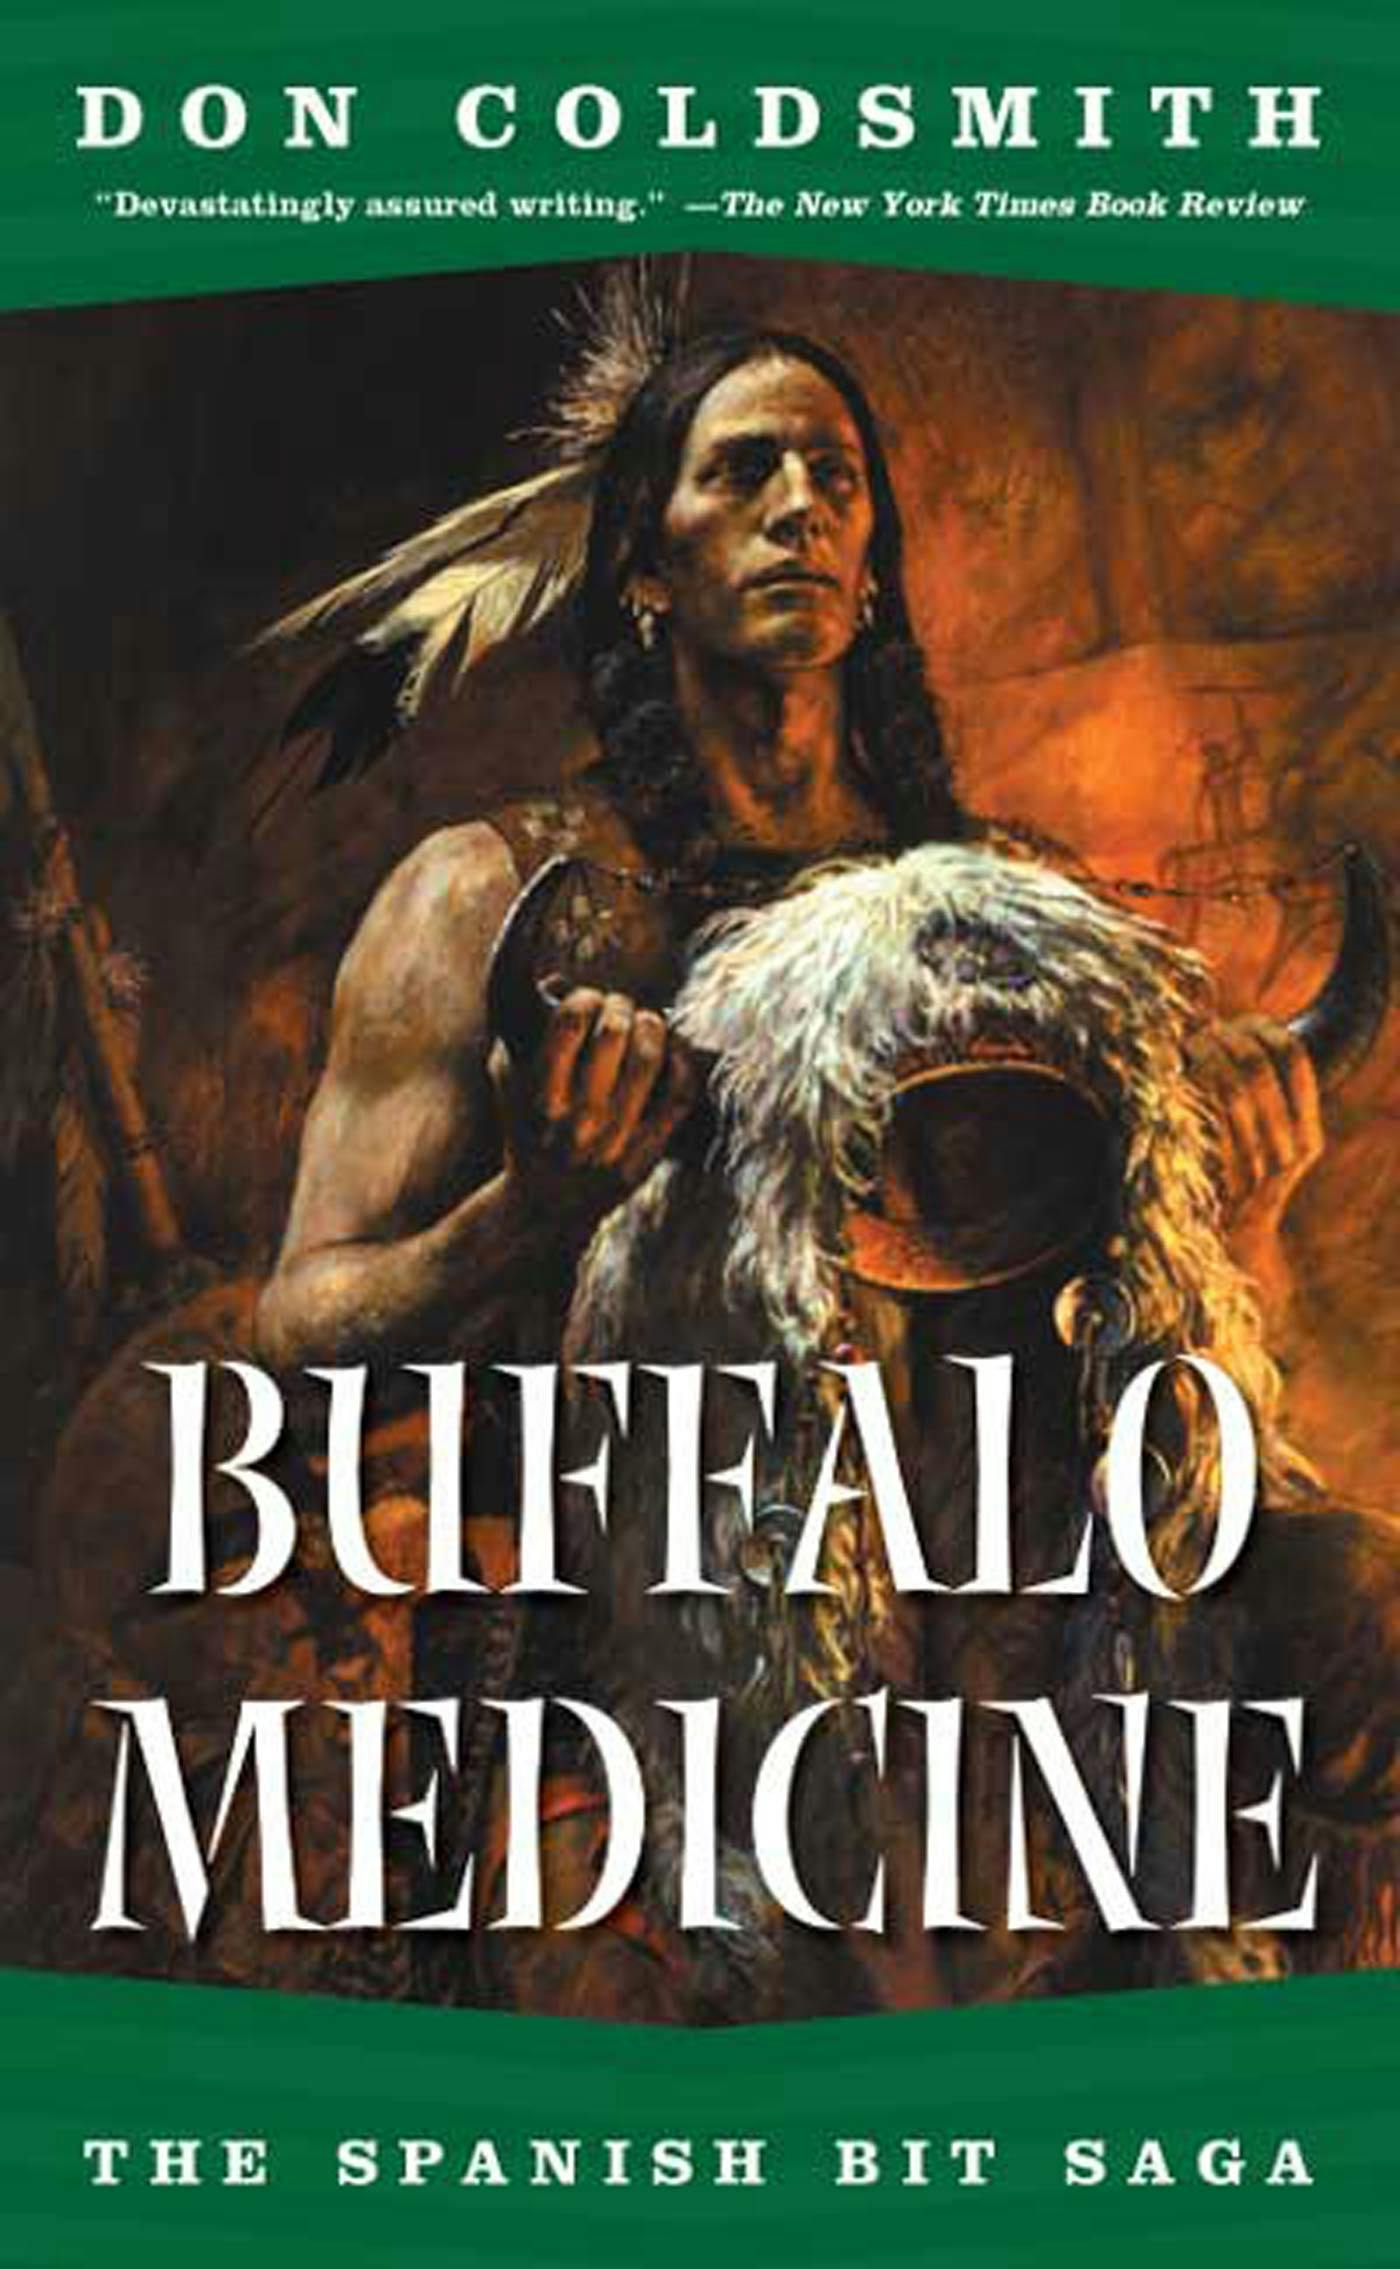 Cover for the book titled as: Buffalo Medicine